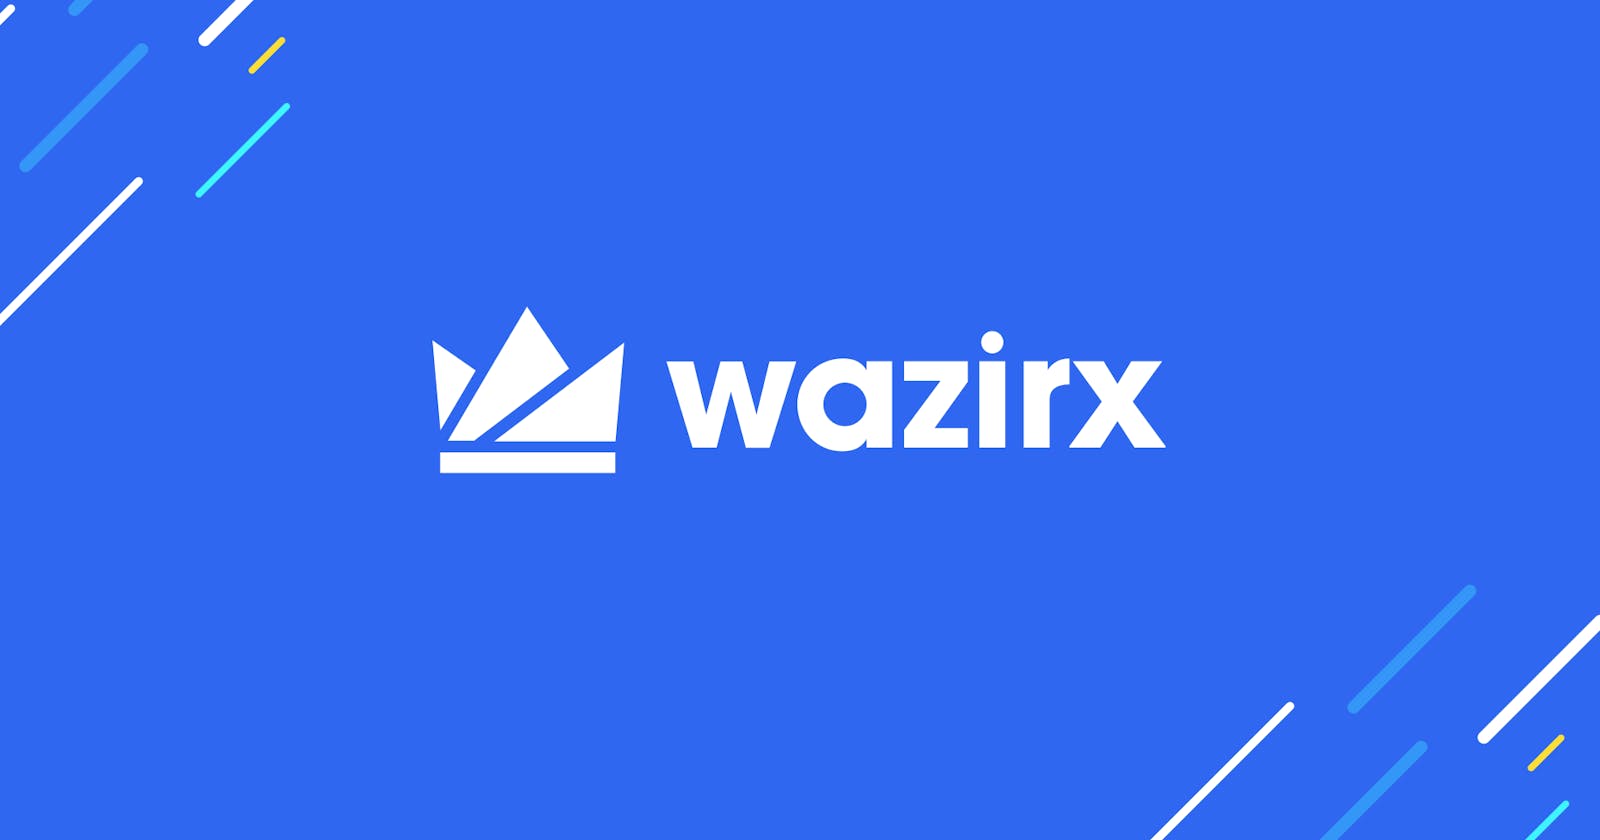 Oye dost!! Do you know WazirX has listed "VITE" in INR & USDT?